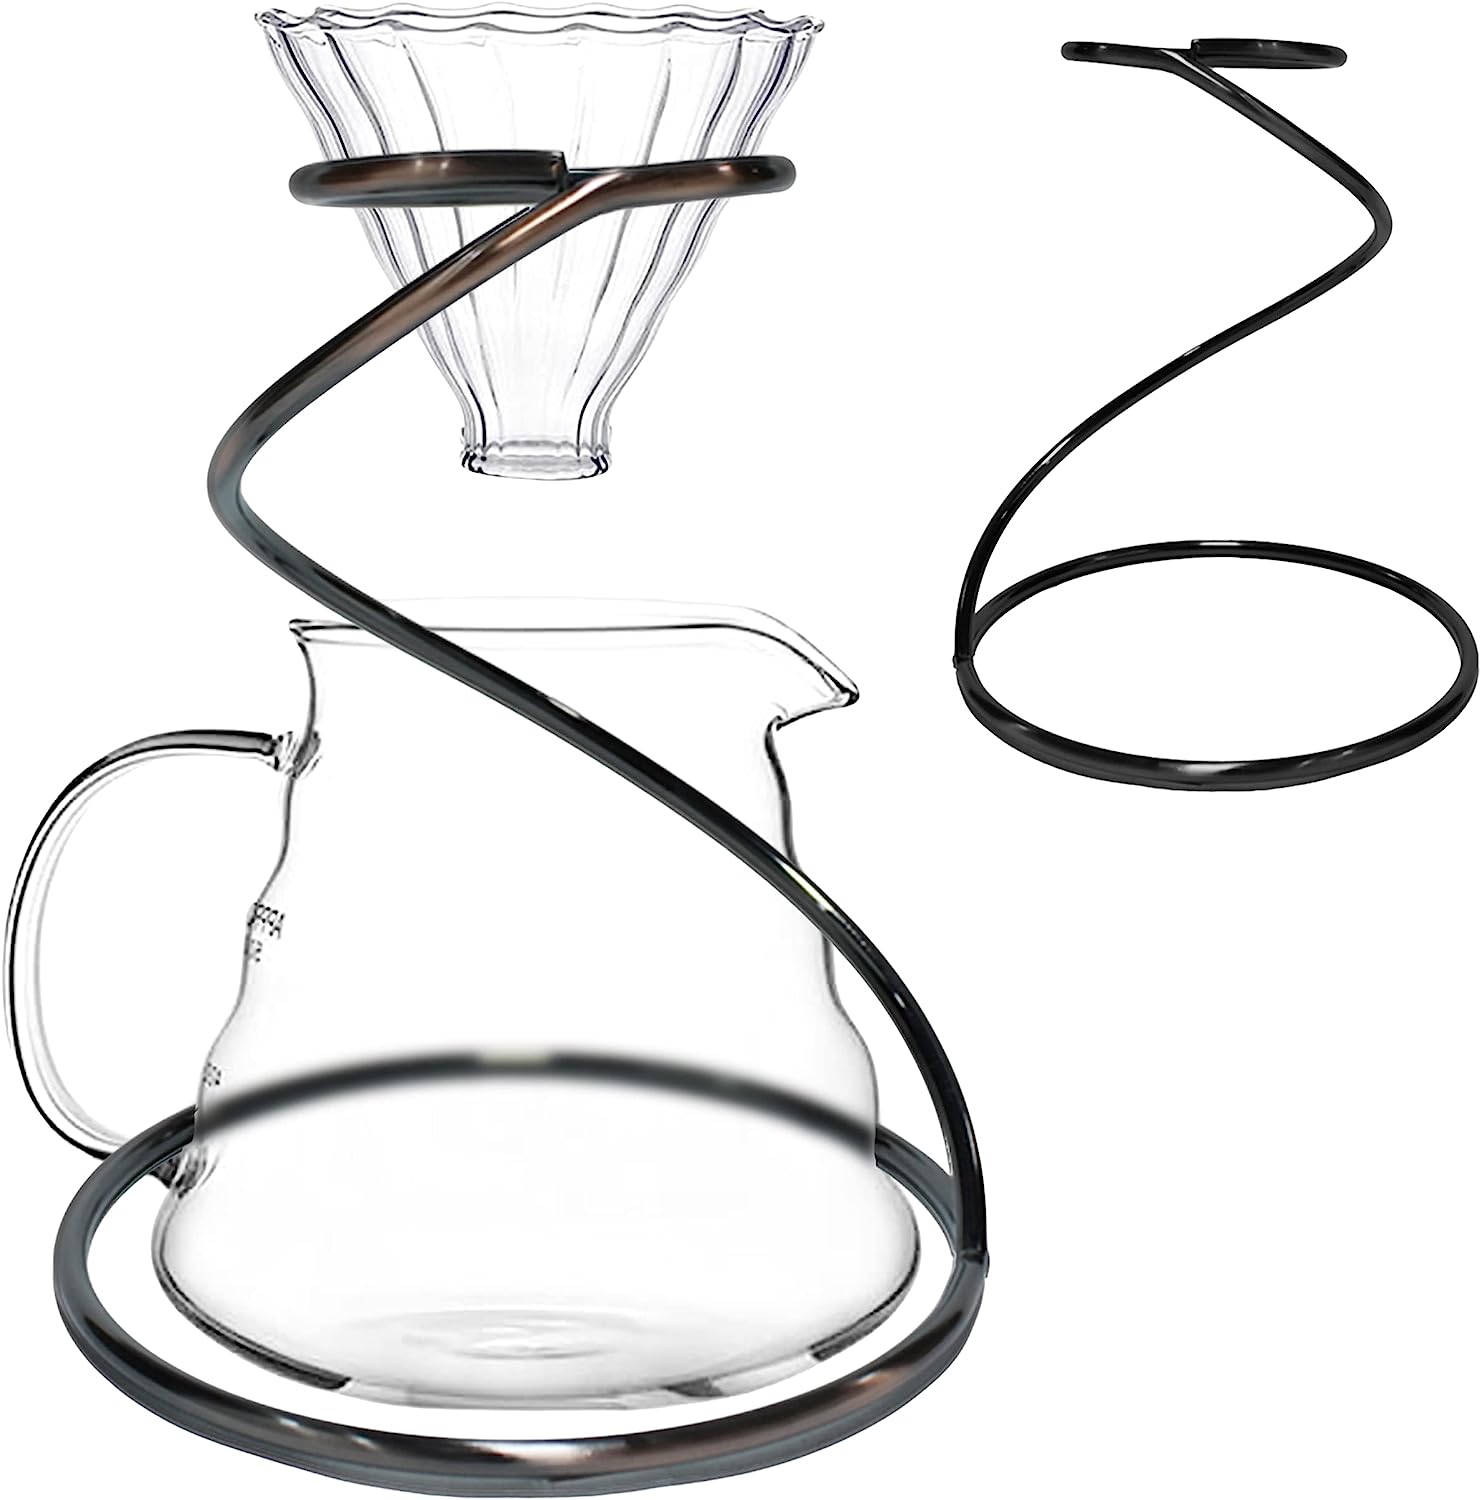 Chemex Pour-Over Glass Coffeemaker - Glass Handle